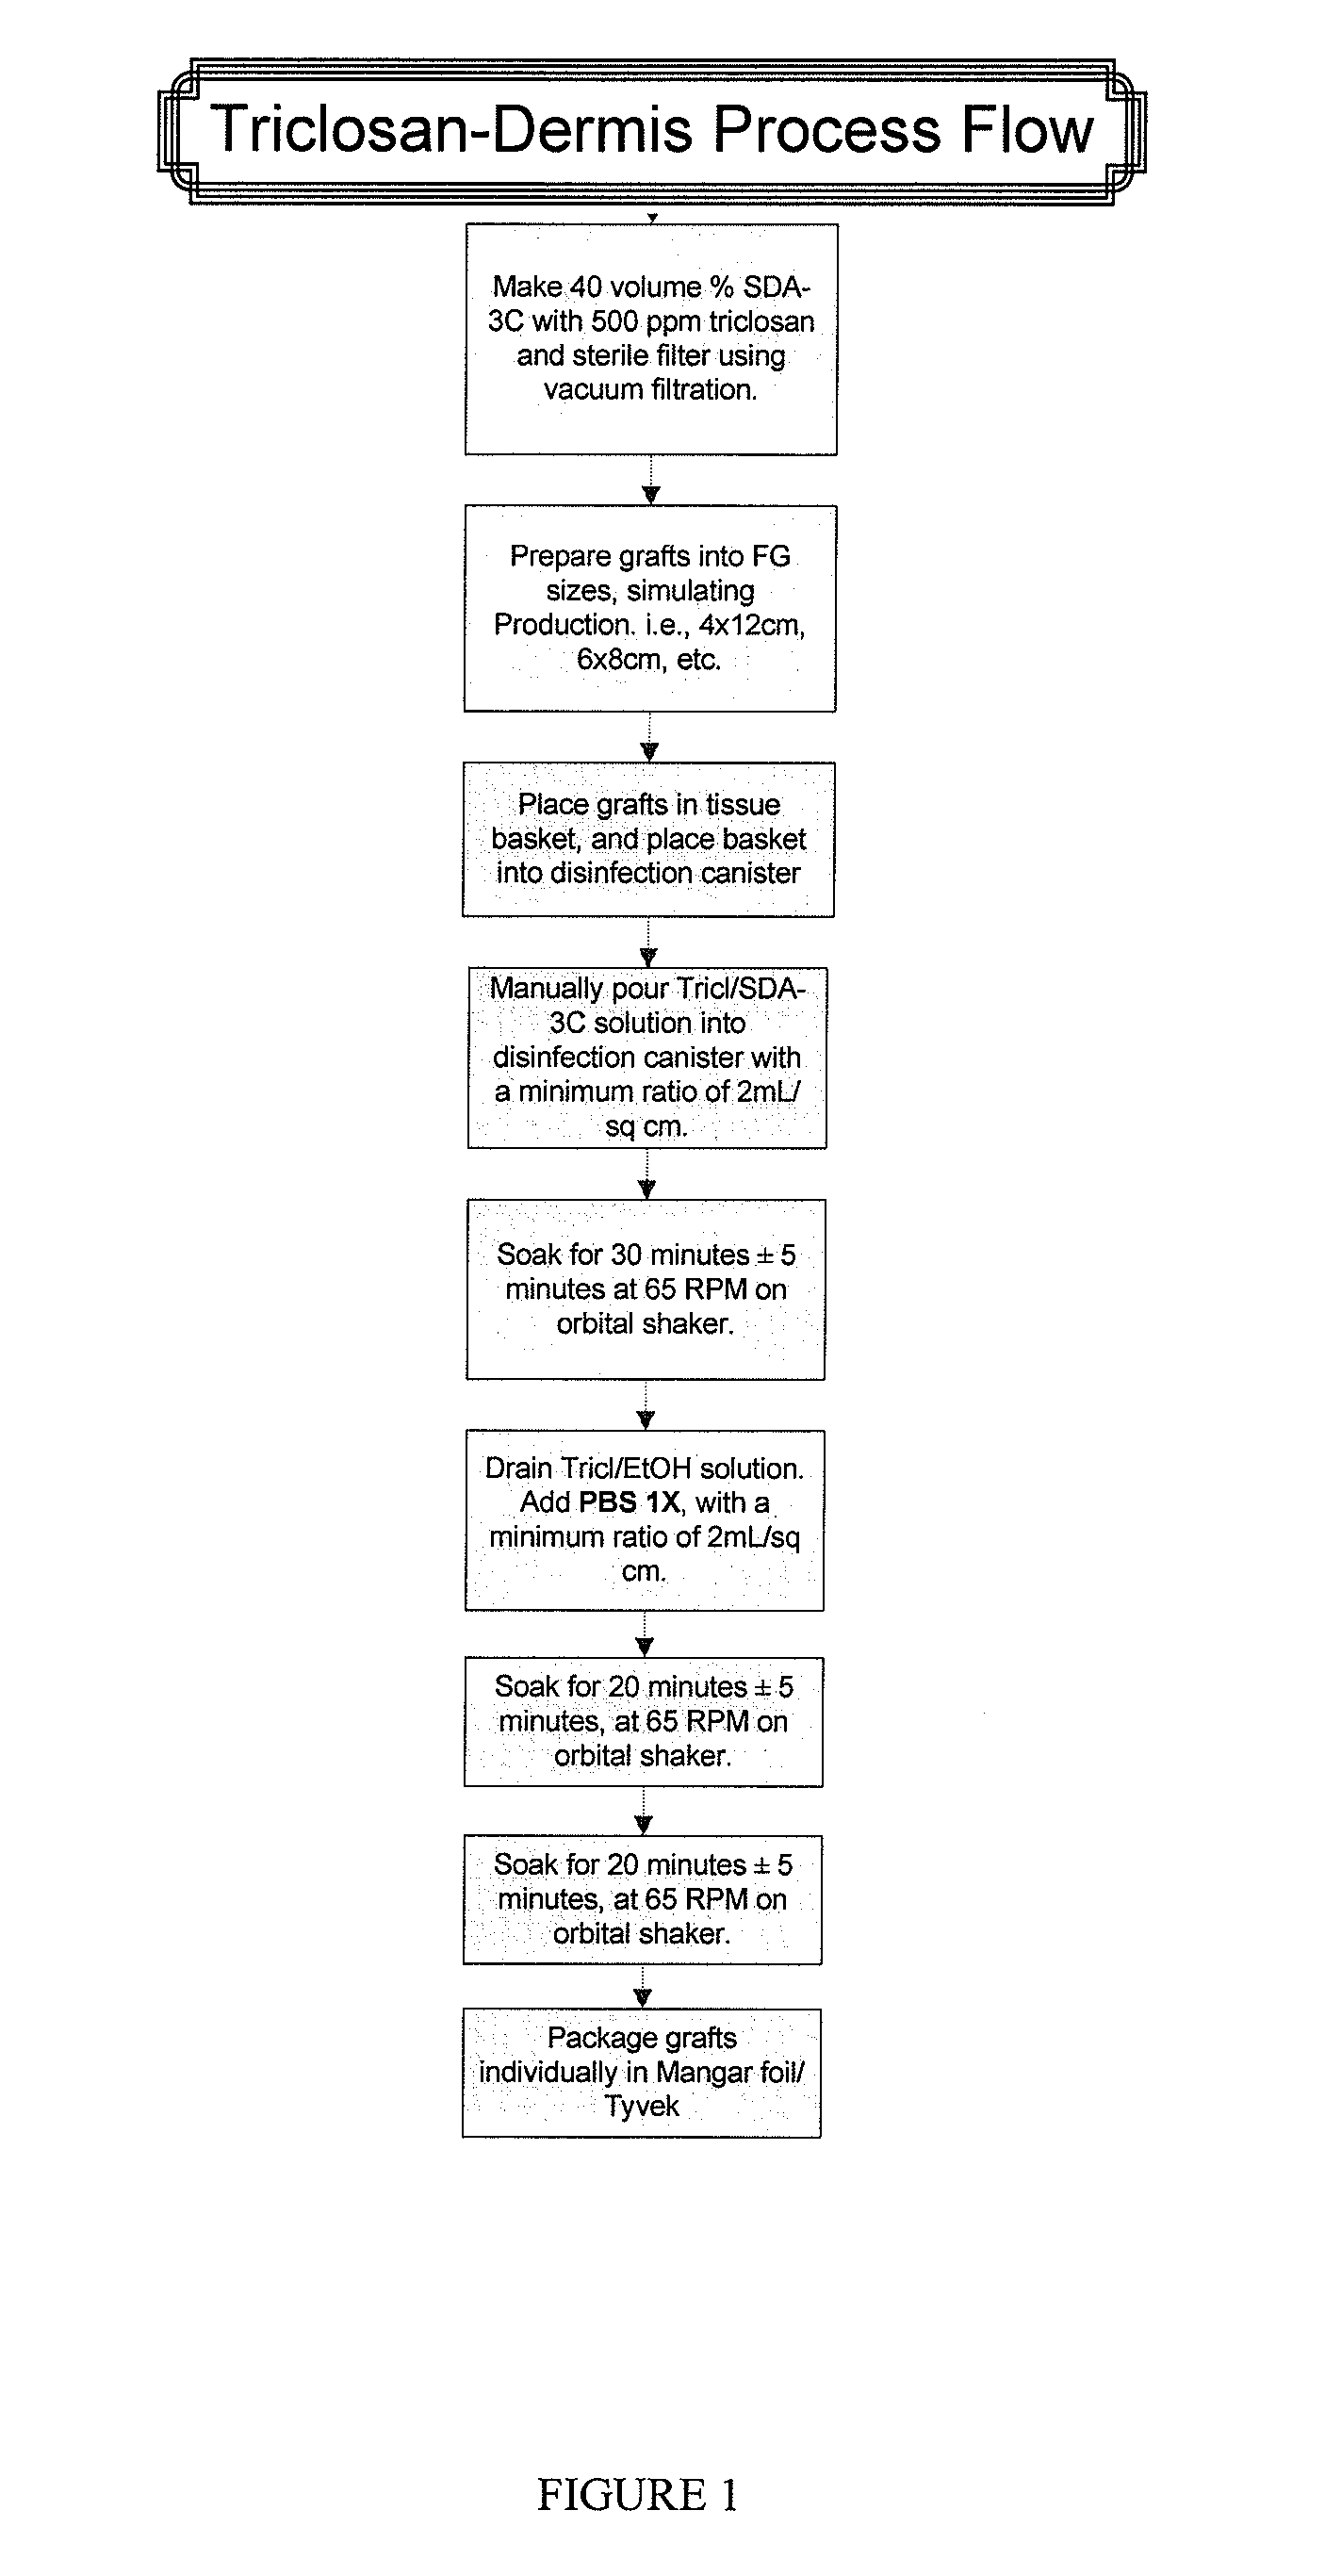 Biologic matrices comprising Anti-infective methods and compositions related thereto